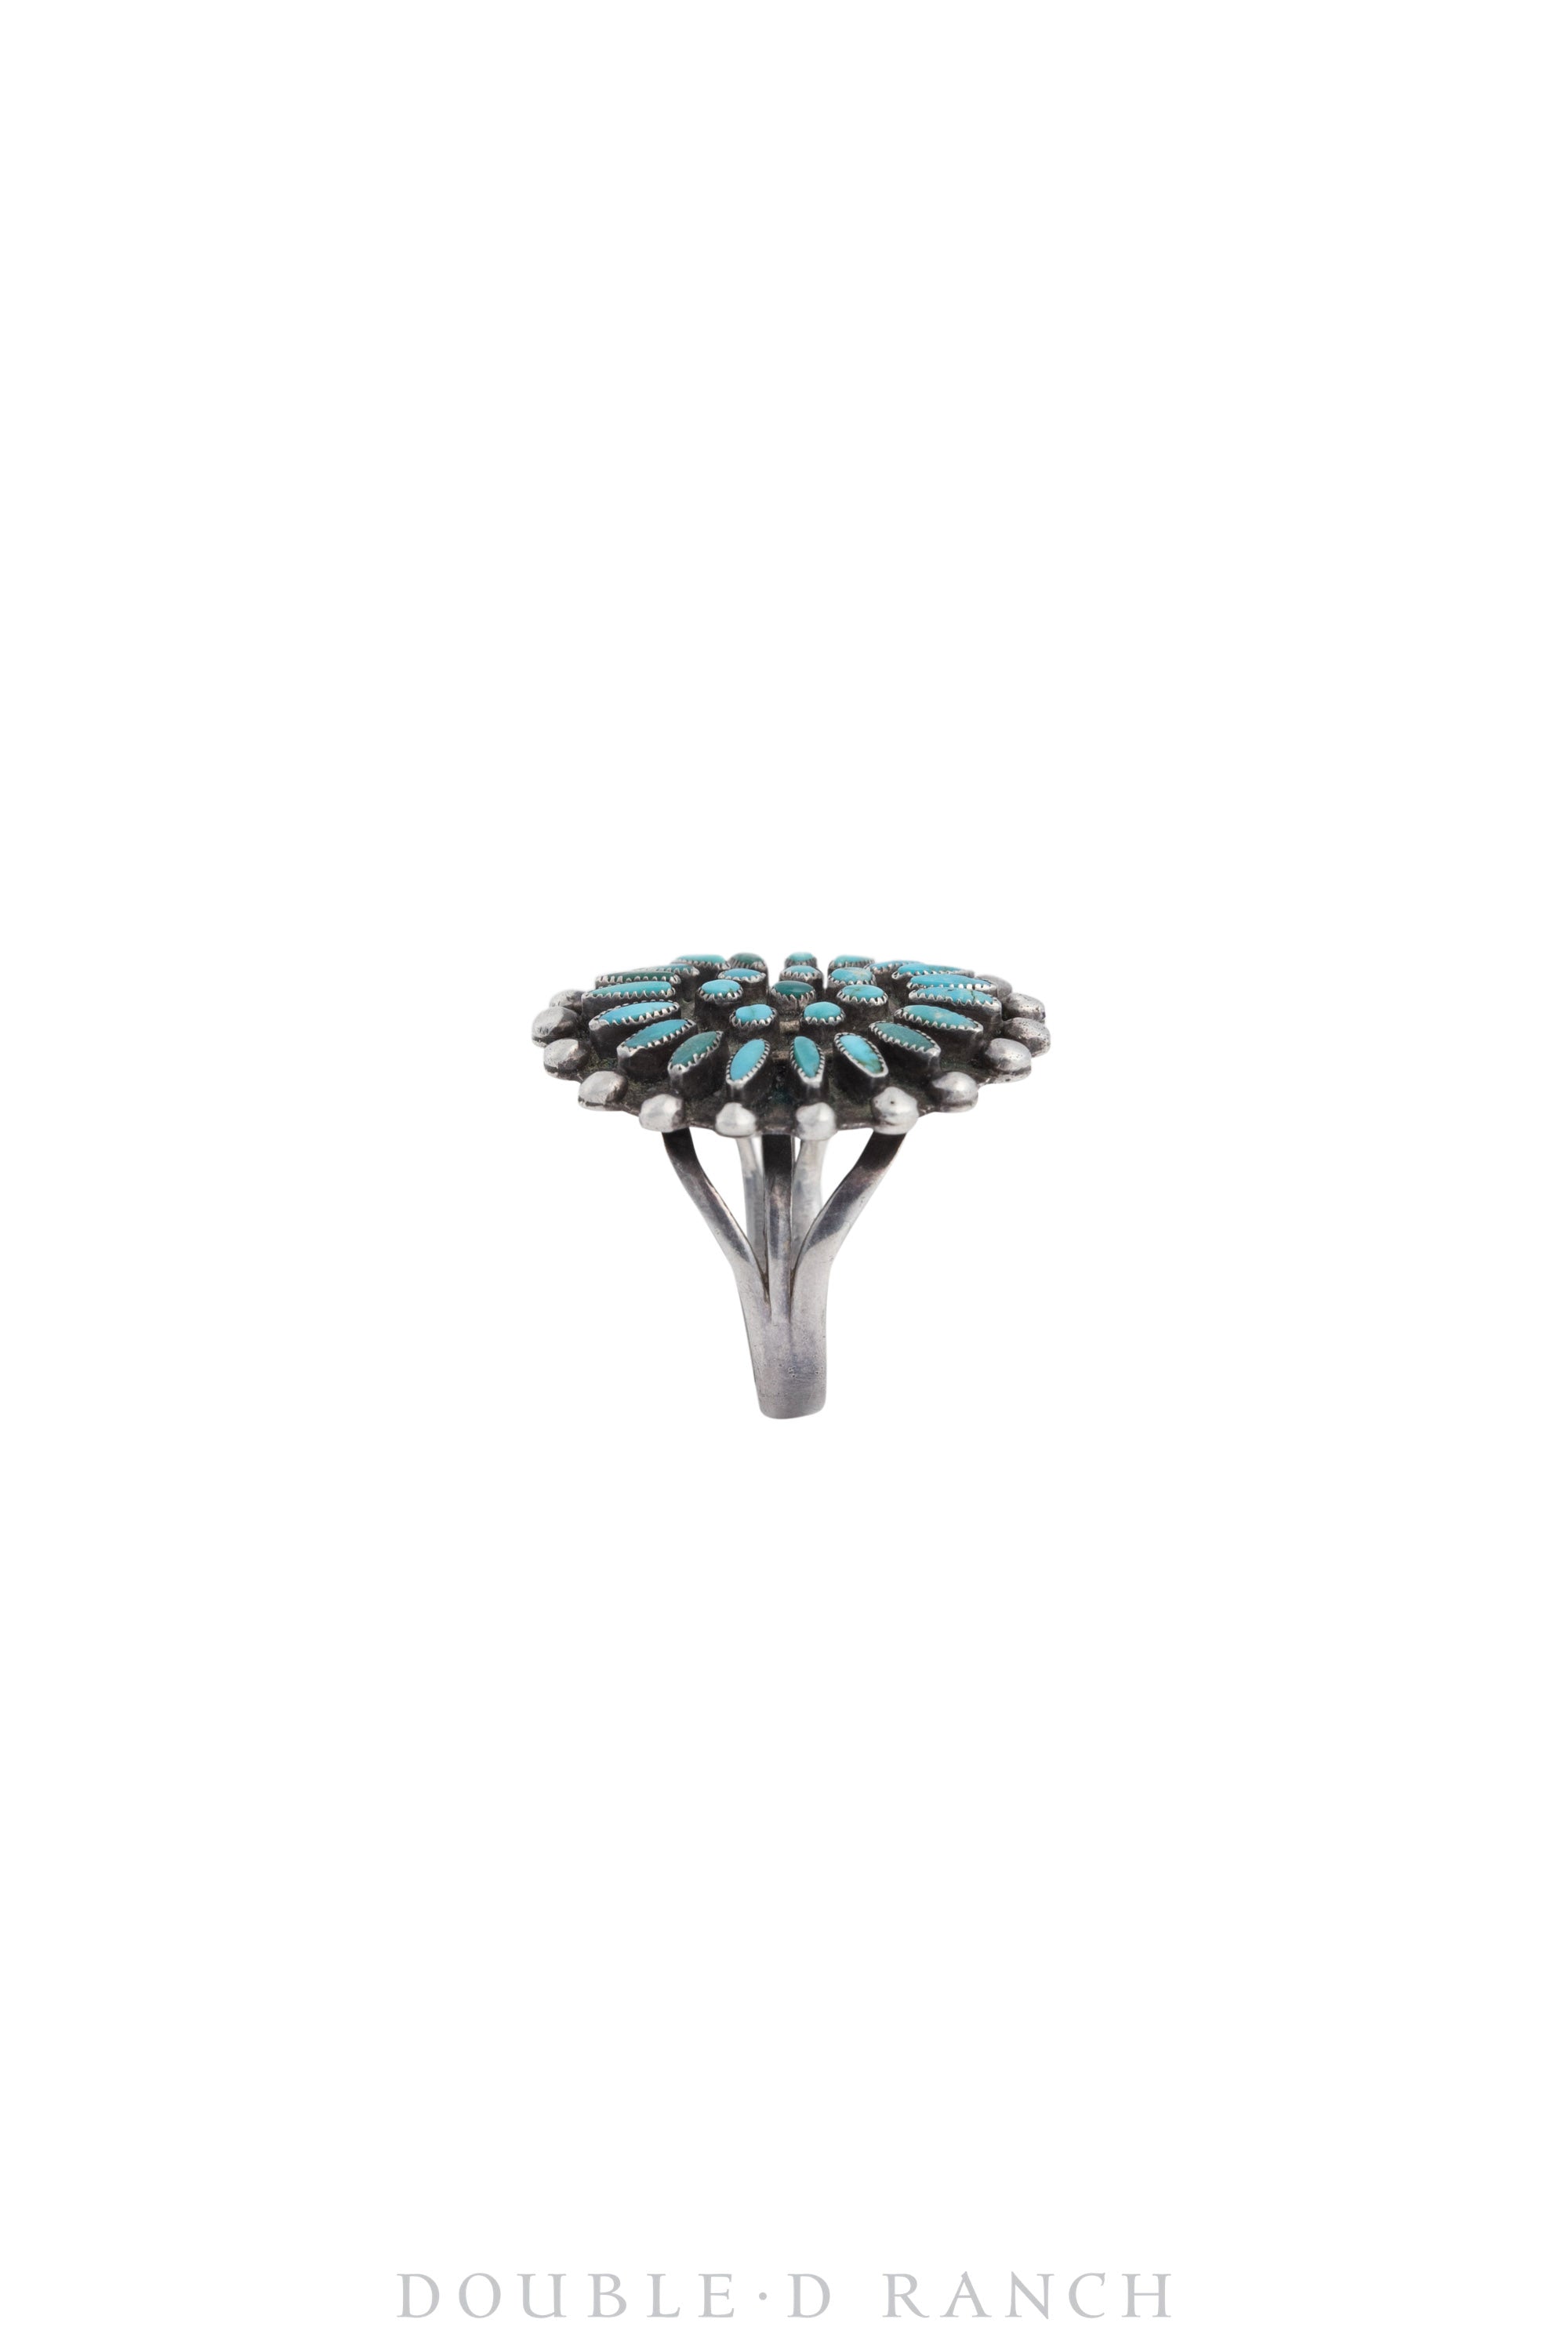 Ring, Cluster, Turquoise, Zuni, Vintage ‘40s, 1373